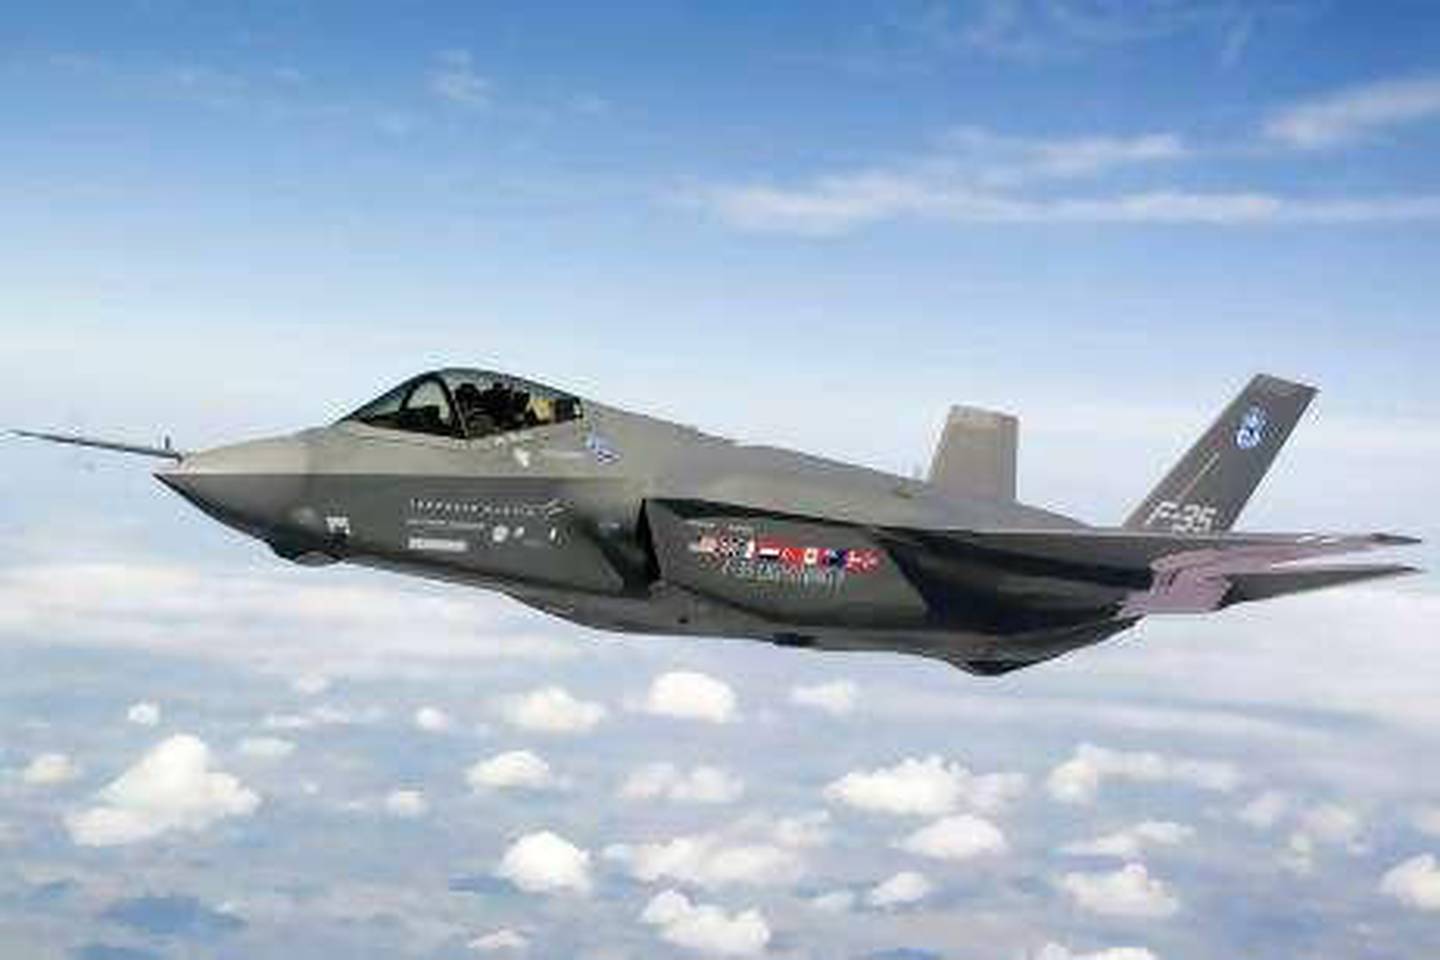 An F-35 Lightning II fighter jet makes a test flight over Fort Worth, Texas, U.S., on Sept. 5, 2008. Israel wants to buy as many as 75 Lockheed Martin Corp. F-35 Lightning II fighter jets from the U.S. for as much as $15.2 billion, the Pentagon agency responsible for foreign sales said today. Source: Lockheed Martin/US Air Force via Bloomberg News